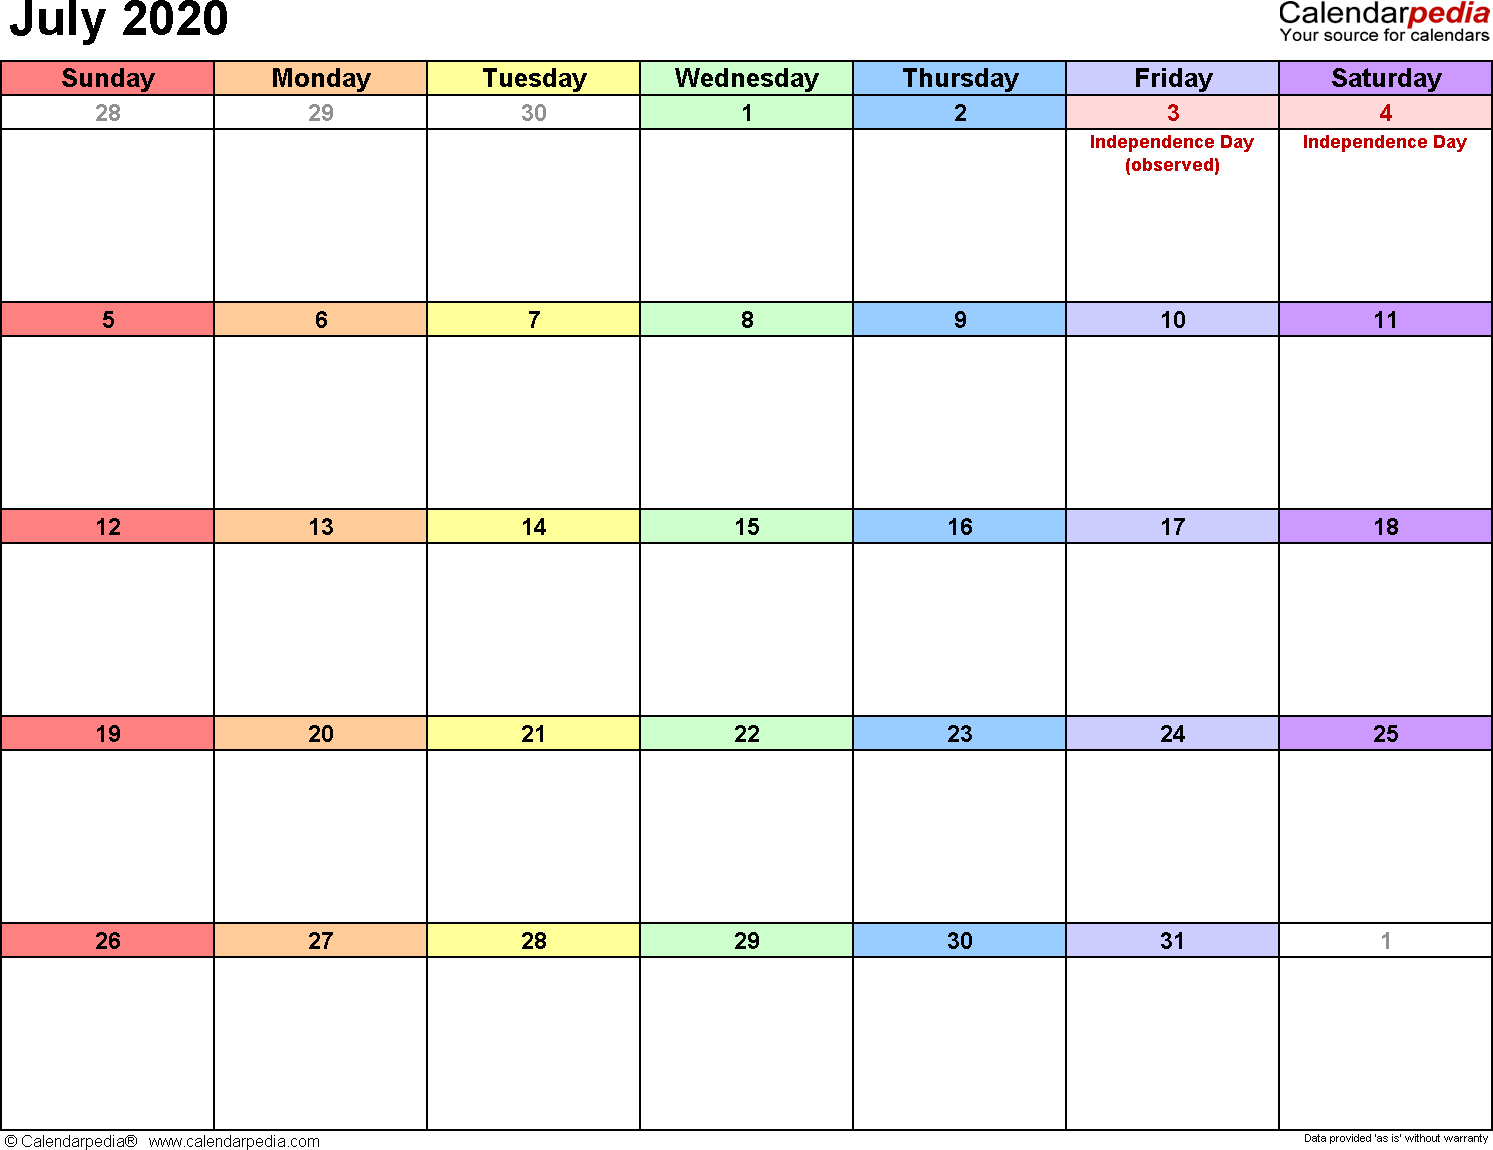 July 2020 Calendars For Word, Excel &amp; Pdf